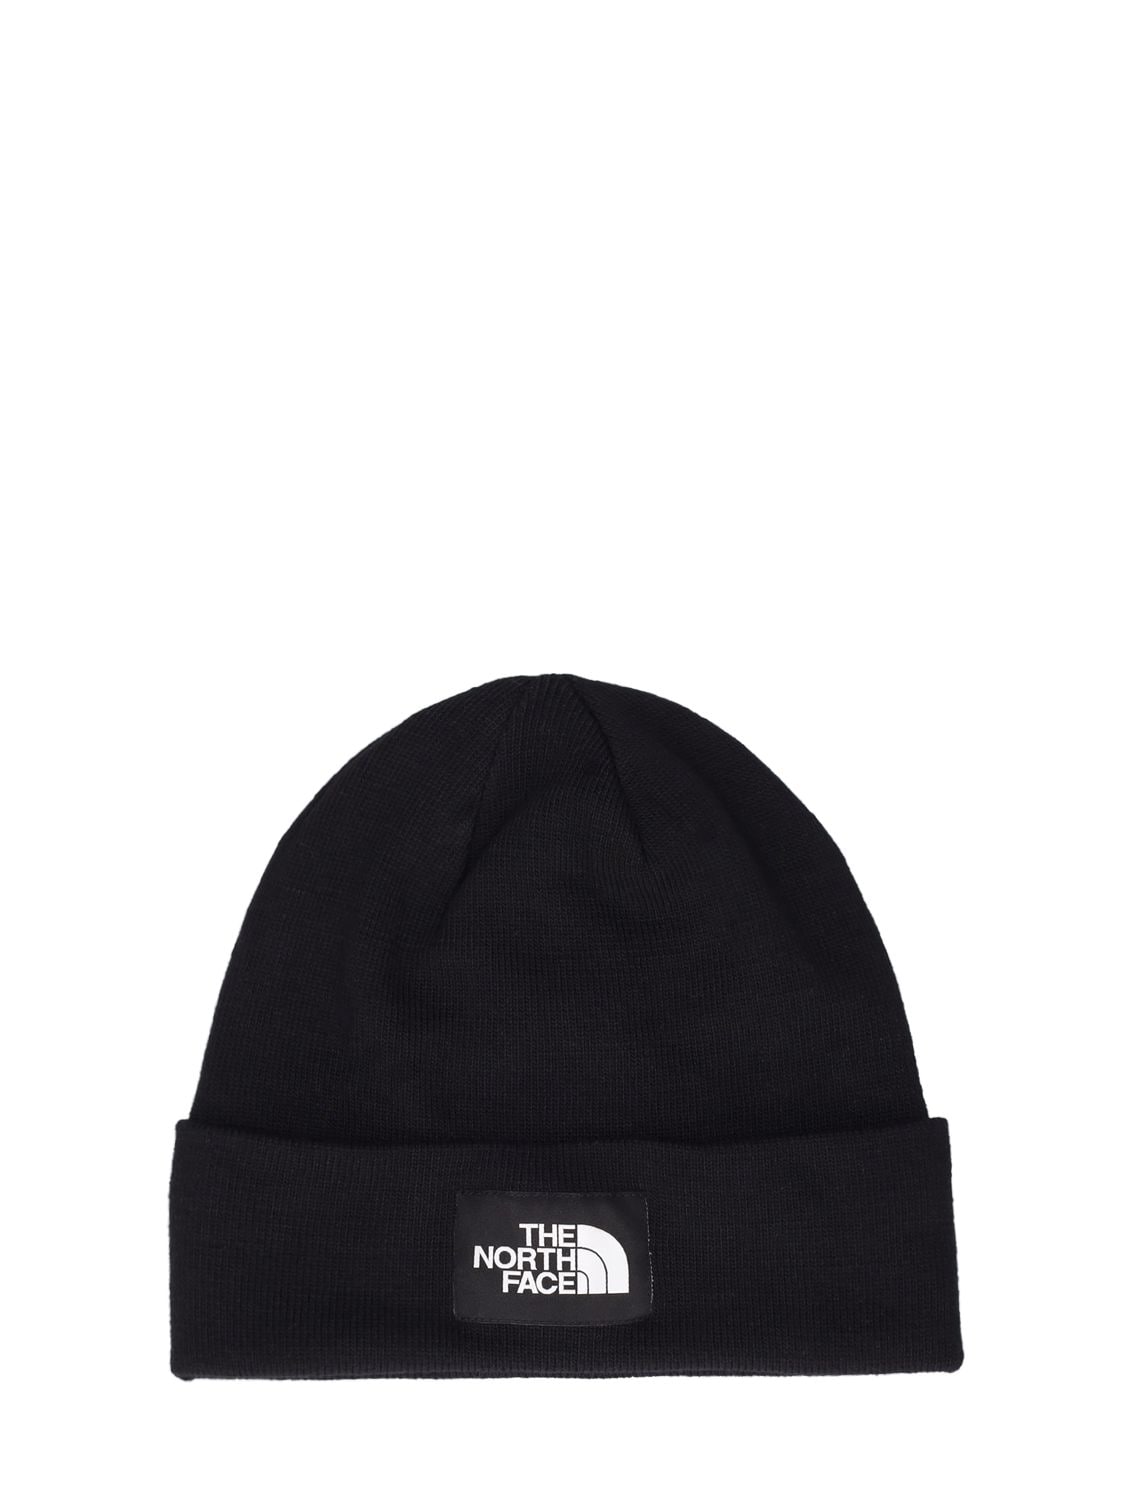 THE NORTH FACE DOCK WORKER BEANIE